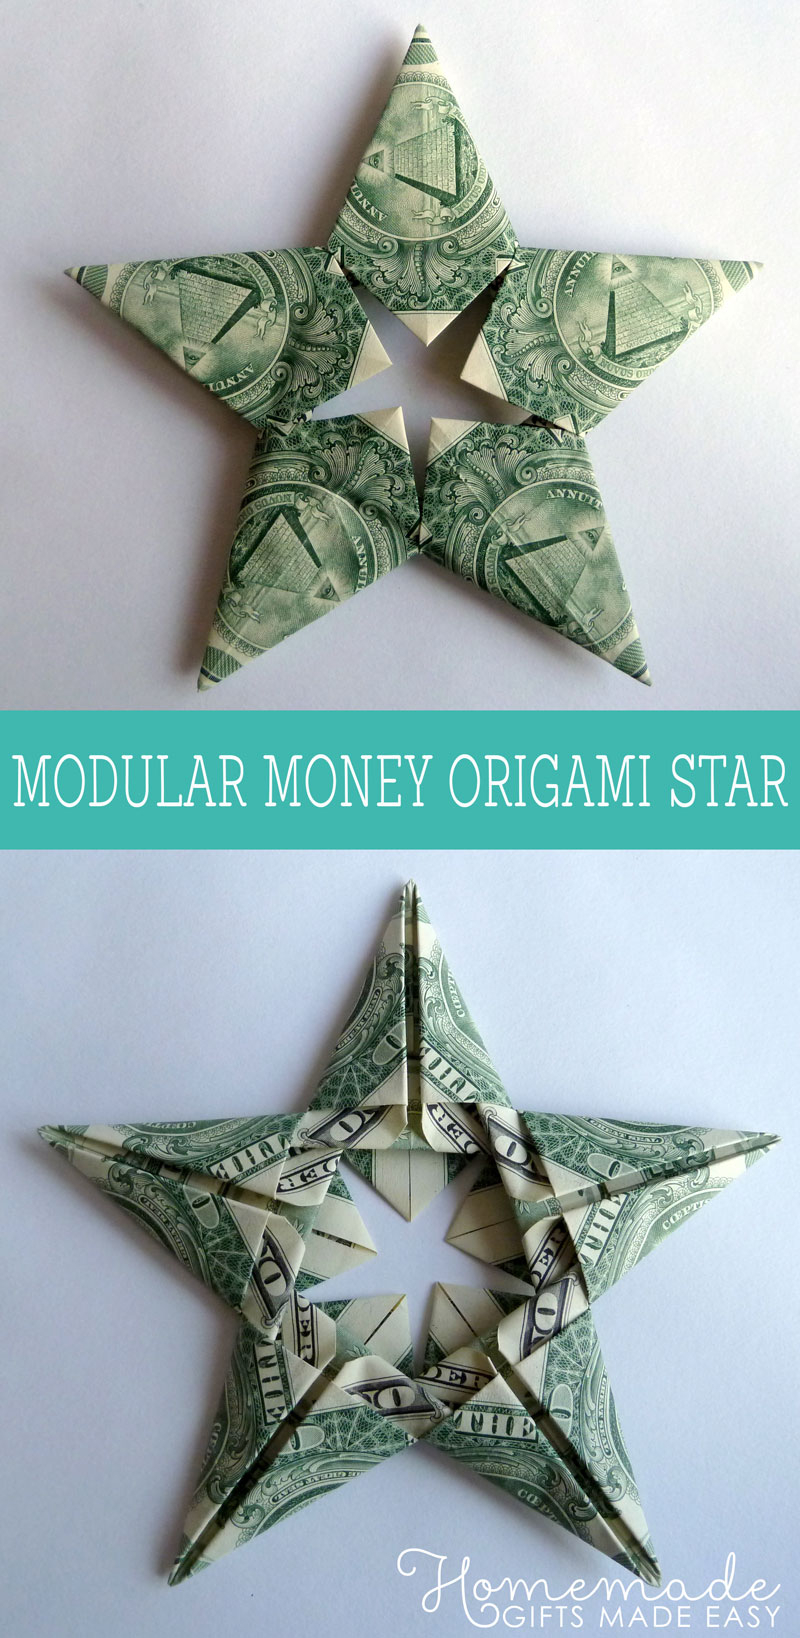 Dollar Origami Instructions Modular Money Origami Star From 5 Bills How To Fold Step Step